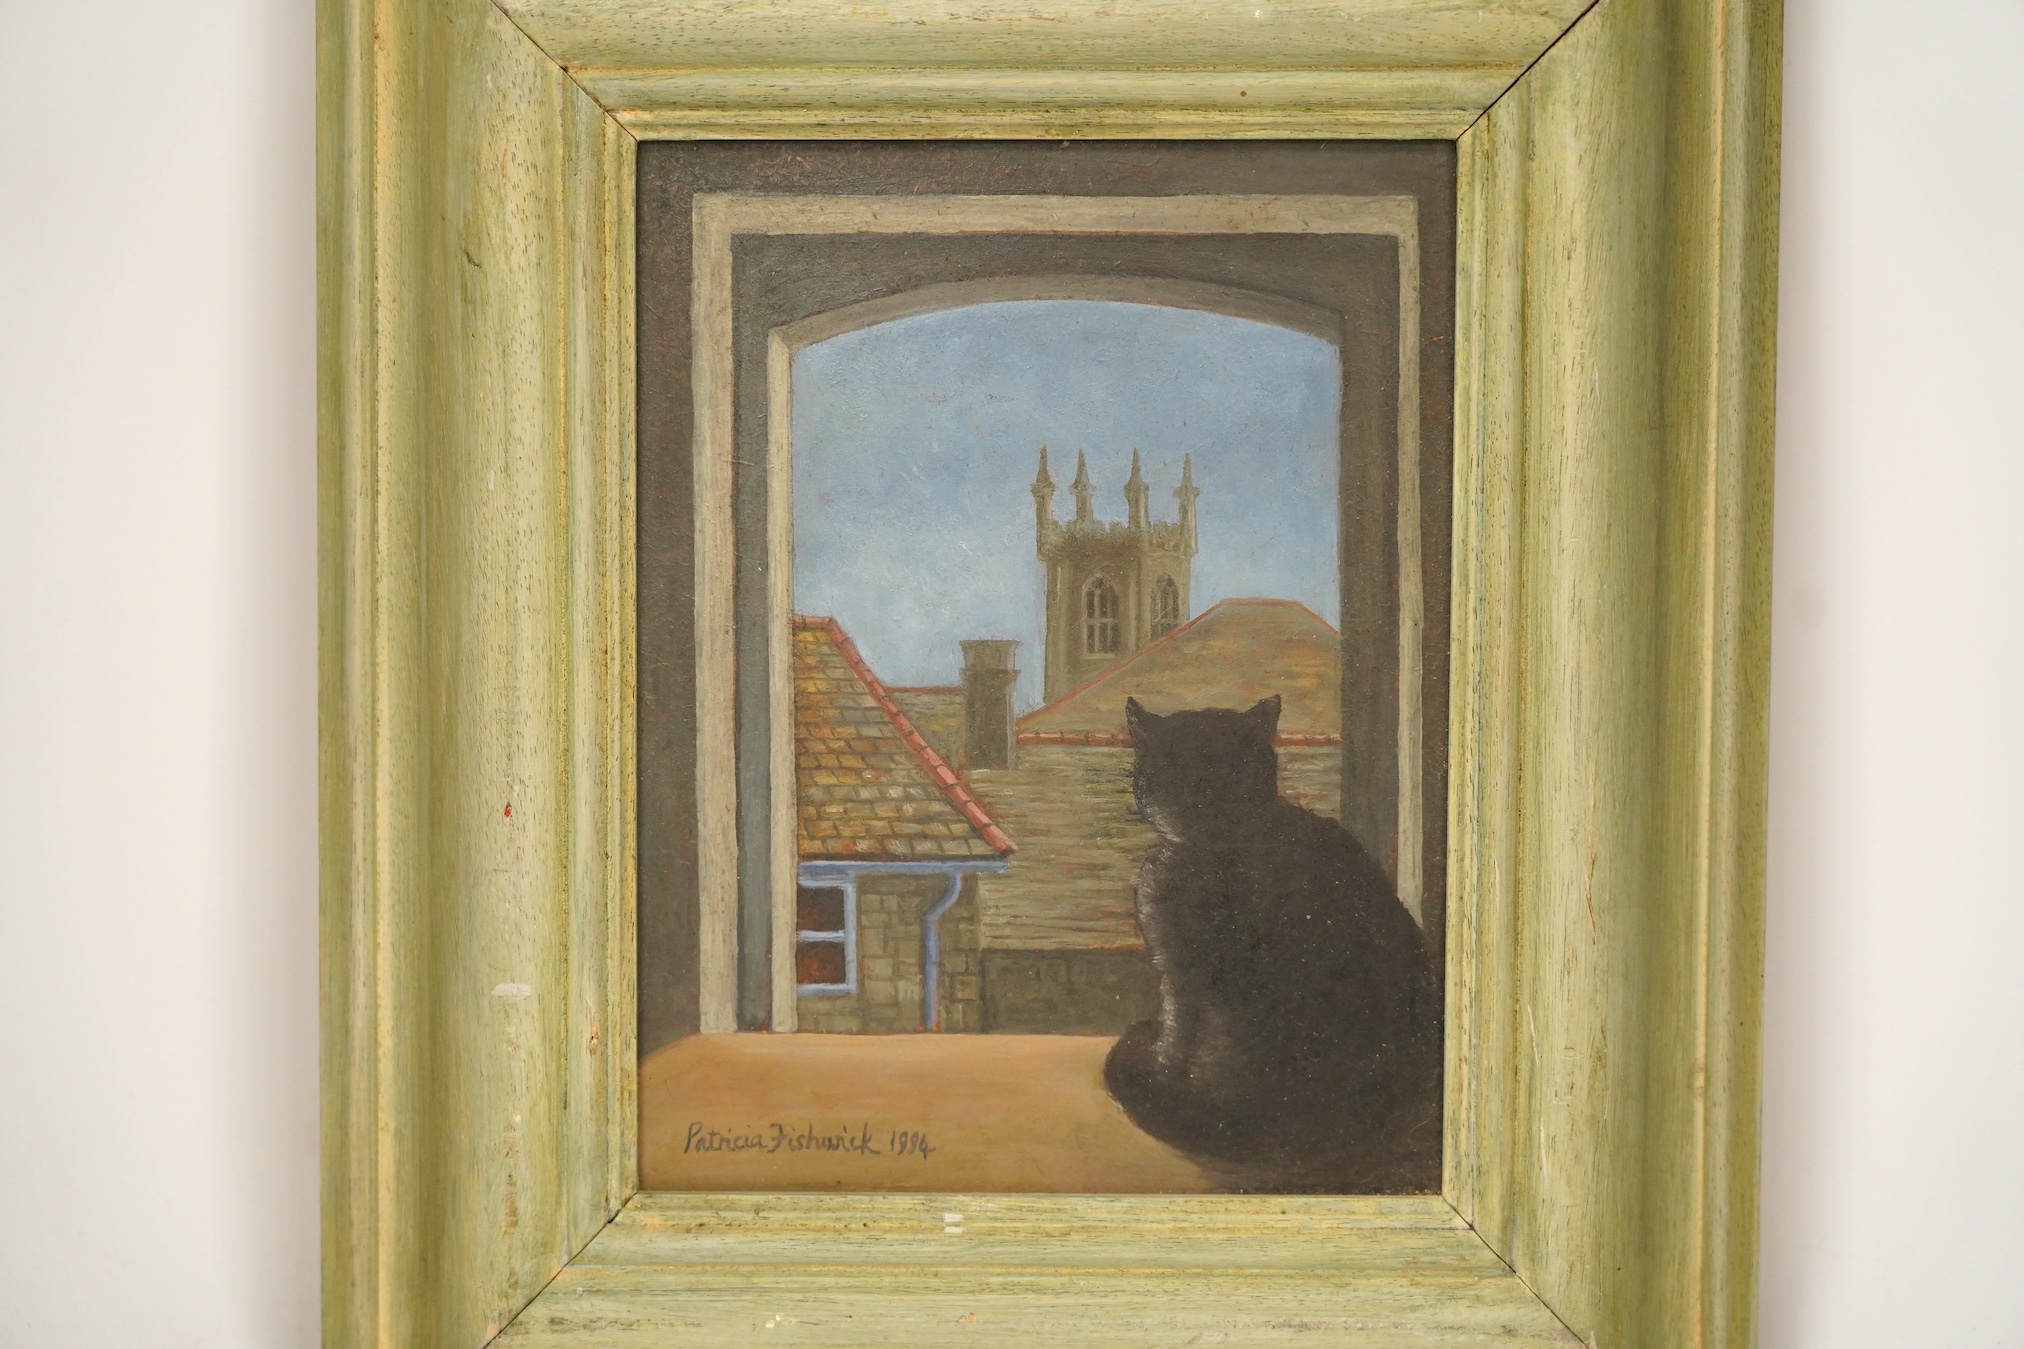 Patricia Fishwick (b.1929), oil on board, Study of a cat before a window, signed and dated 1994, 21.5 x 16.5cm. Condition - fair to good